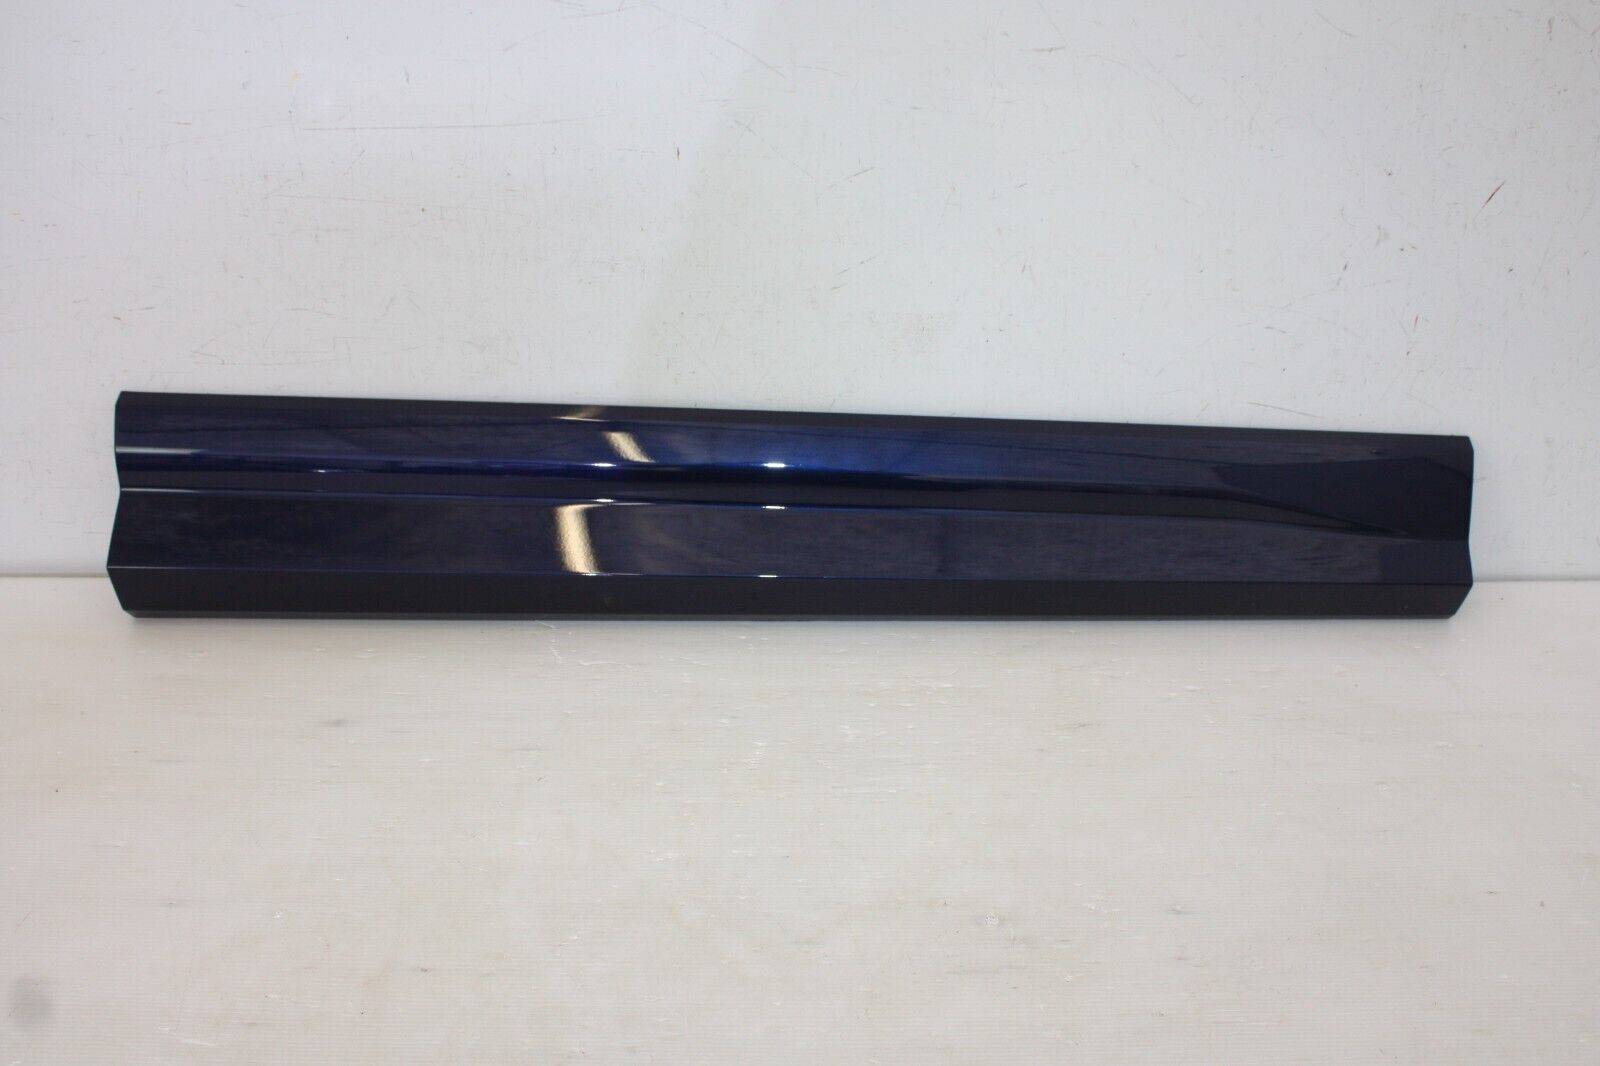 Audi Q2 S Line Front Right Door Moulding 2016 TO 2021 81A853960A Genuine 175503690800